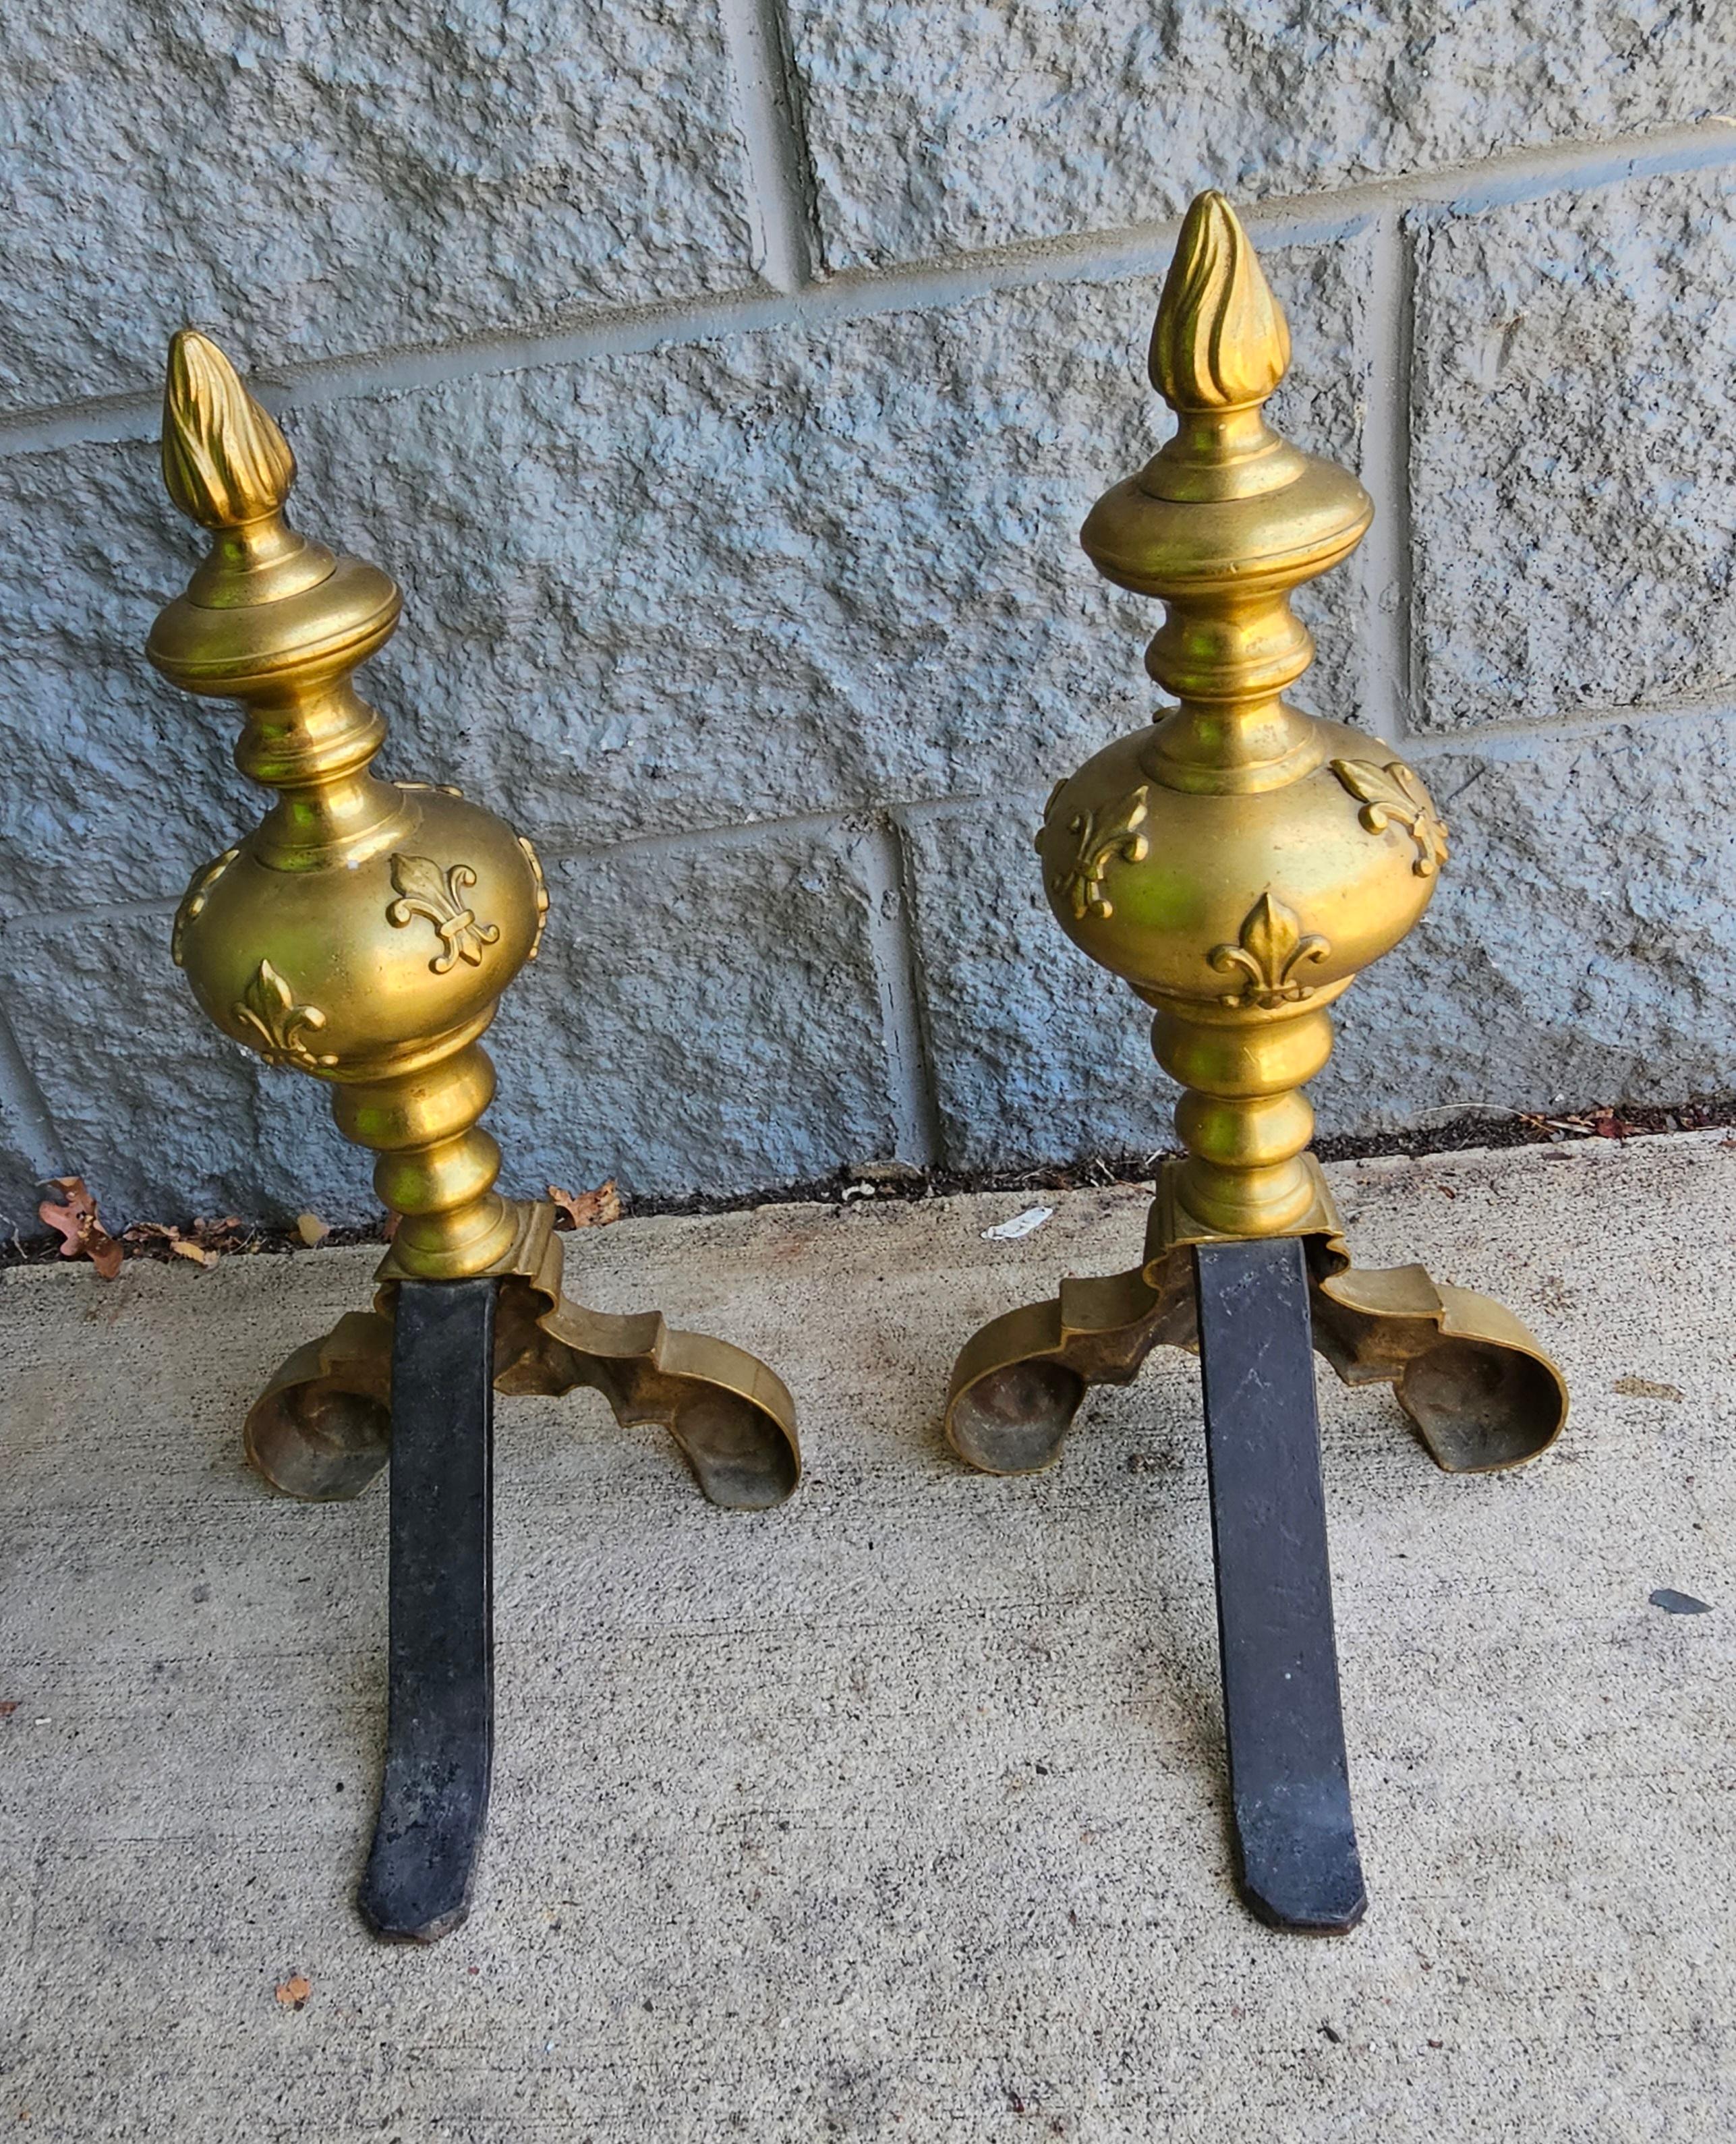 20th Century Empire Sryle Cast Brass Figural Chenets,  Pair In Good Condition For Sale In Germantown, MD